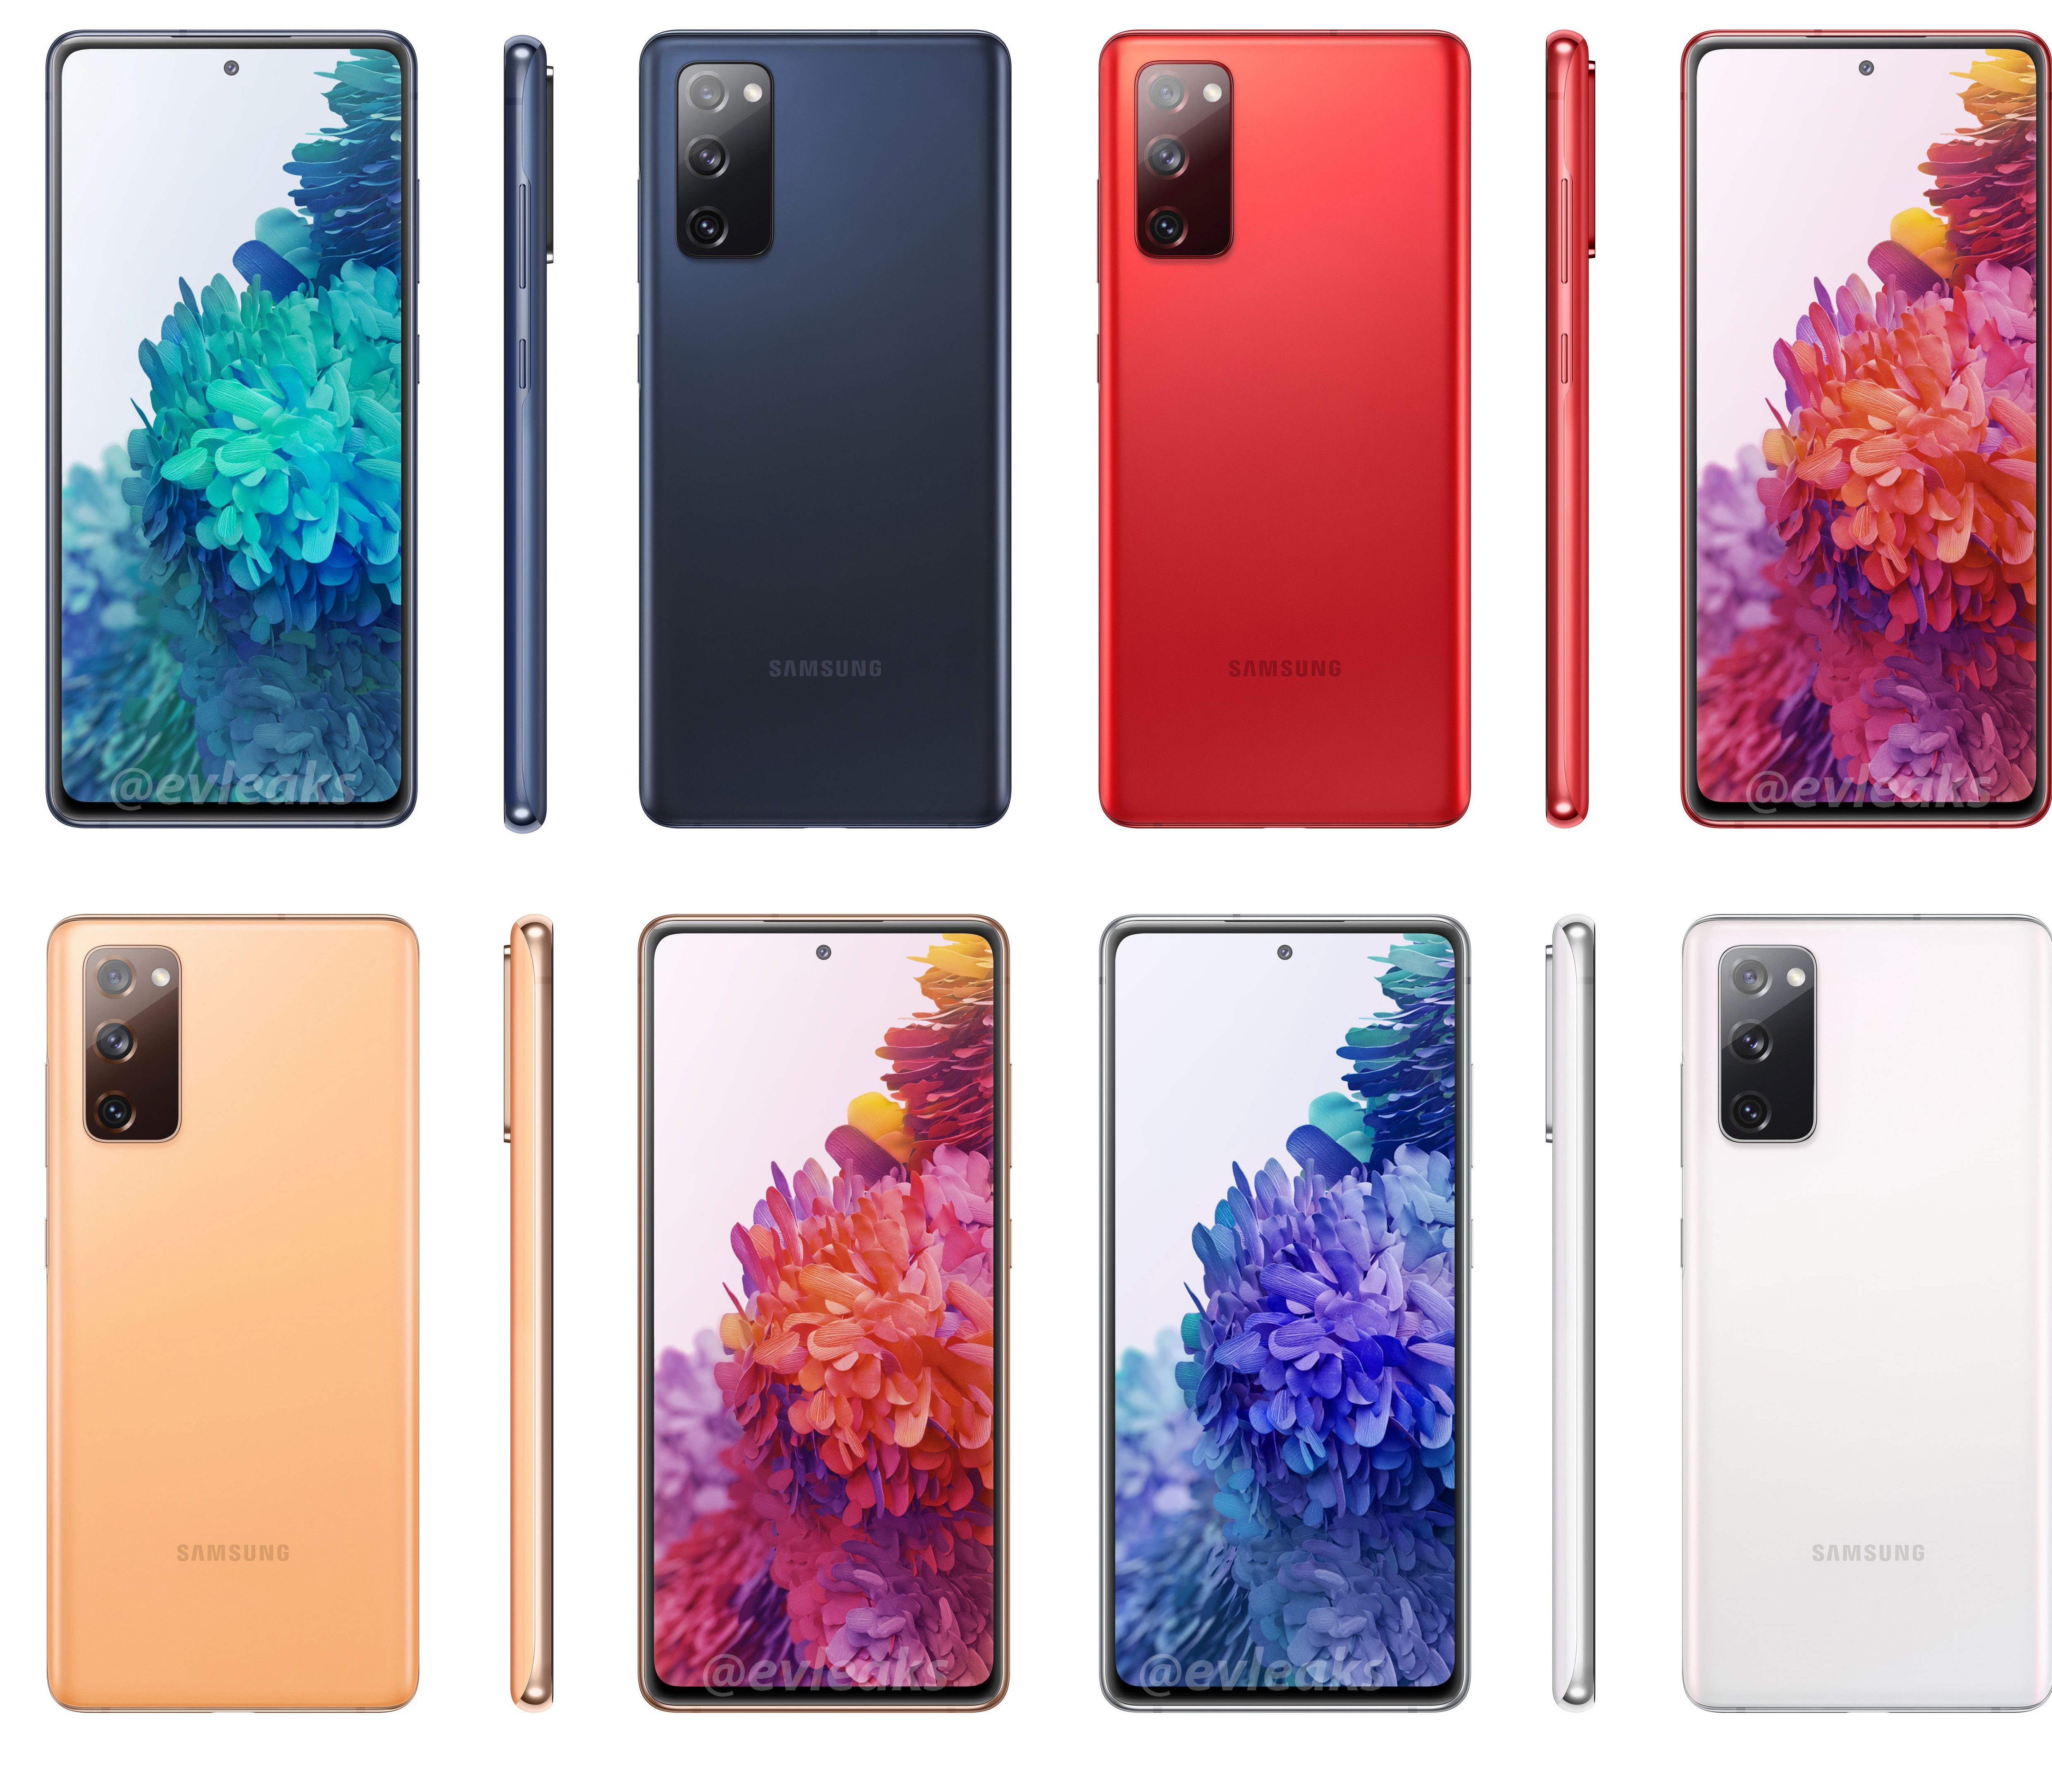 veteran undervandsbåd Mariner Samsung Galaxy S20 Fan Edition looks imminent — and iPhone 12 should be  worried | Tom's Guide